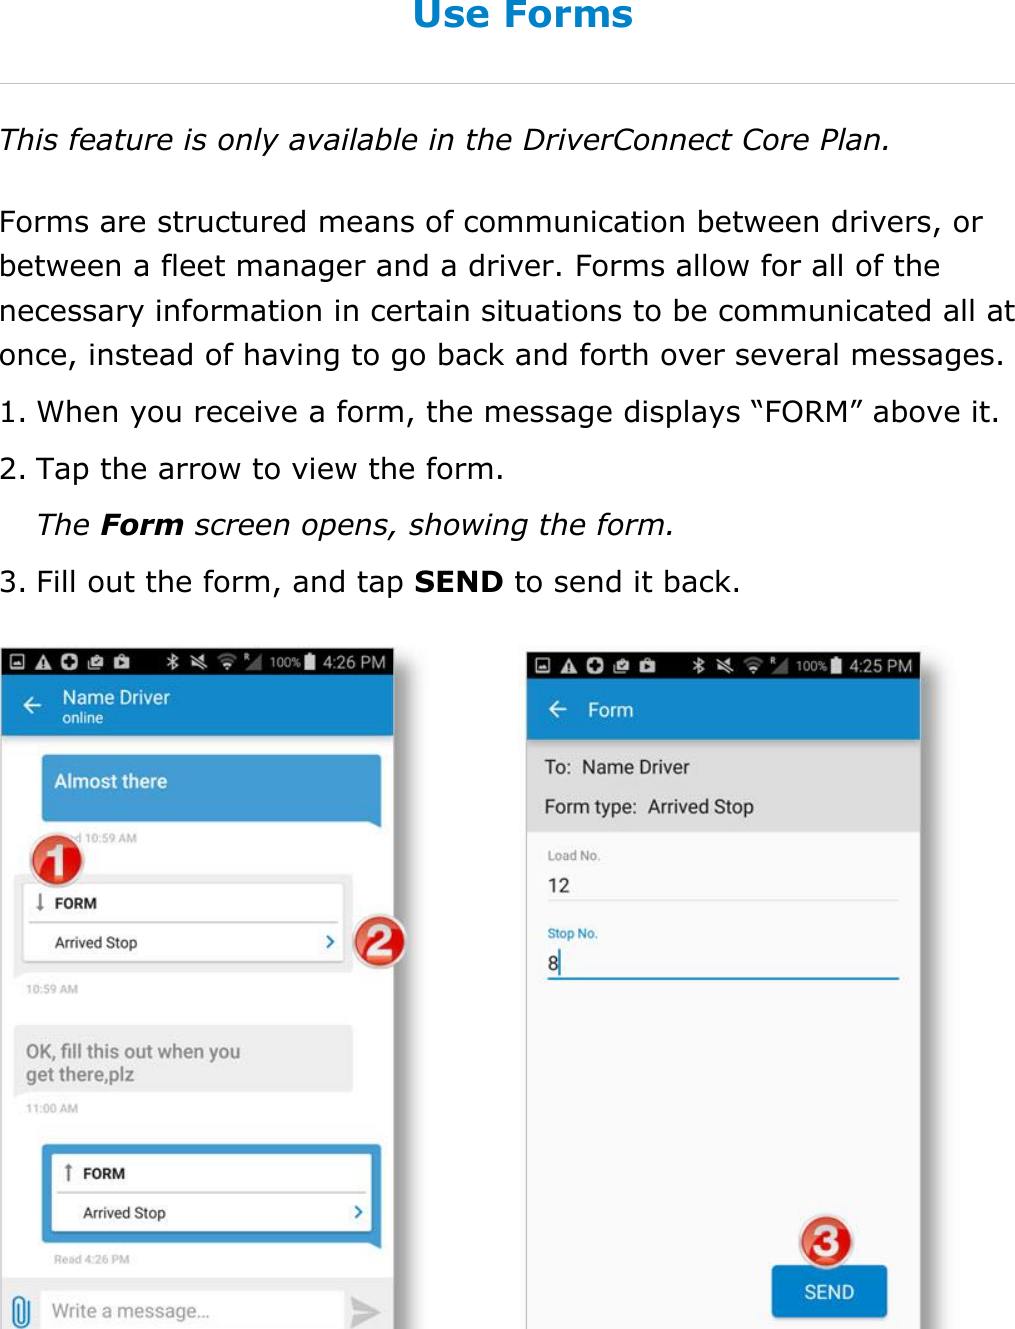 Send Messages, Forms, and Workflows DriverConnect User Guide  76 © 2017, Rand McNally, Inc. Use Forms This feature is only available in the DriverConnect Core Plan. Forms are structured means of communication between drivers, or between a fleet manager and a driver. Forms allow for all of the necessary information in certain situations to be communicated all at once, instead of having to go back and forth over several messages. 1. When you receive a form, the message displays “FORM” above it. 2. Tap the arrow to view the form. The Form screen opens, showing the form. 3. Fill out the form, and tap SEND to send it back.    